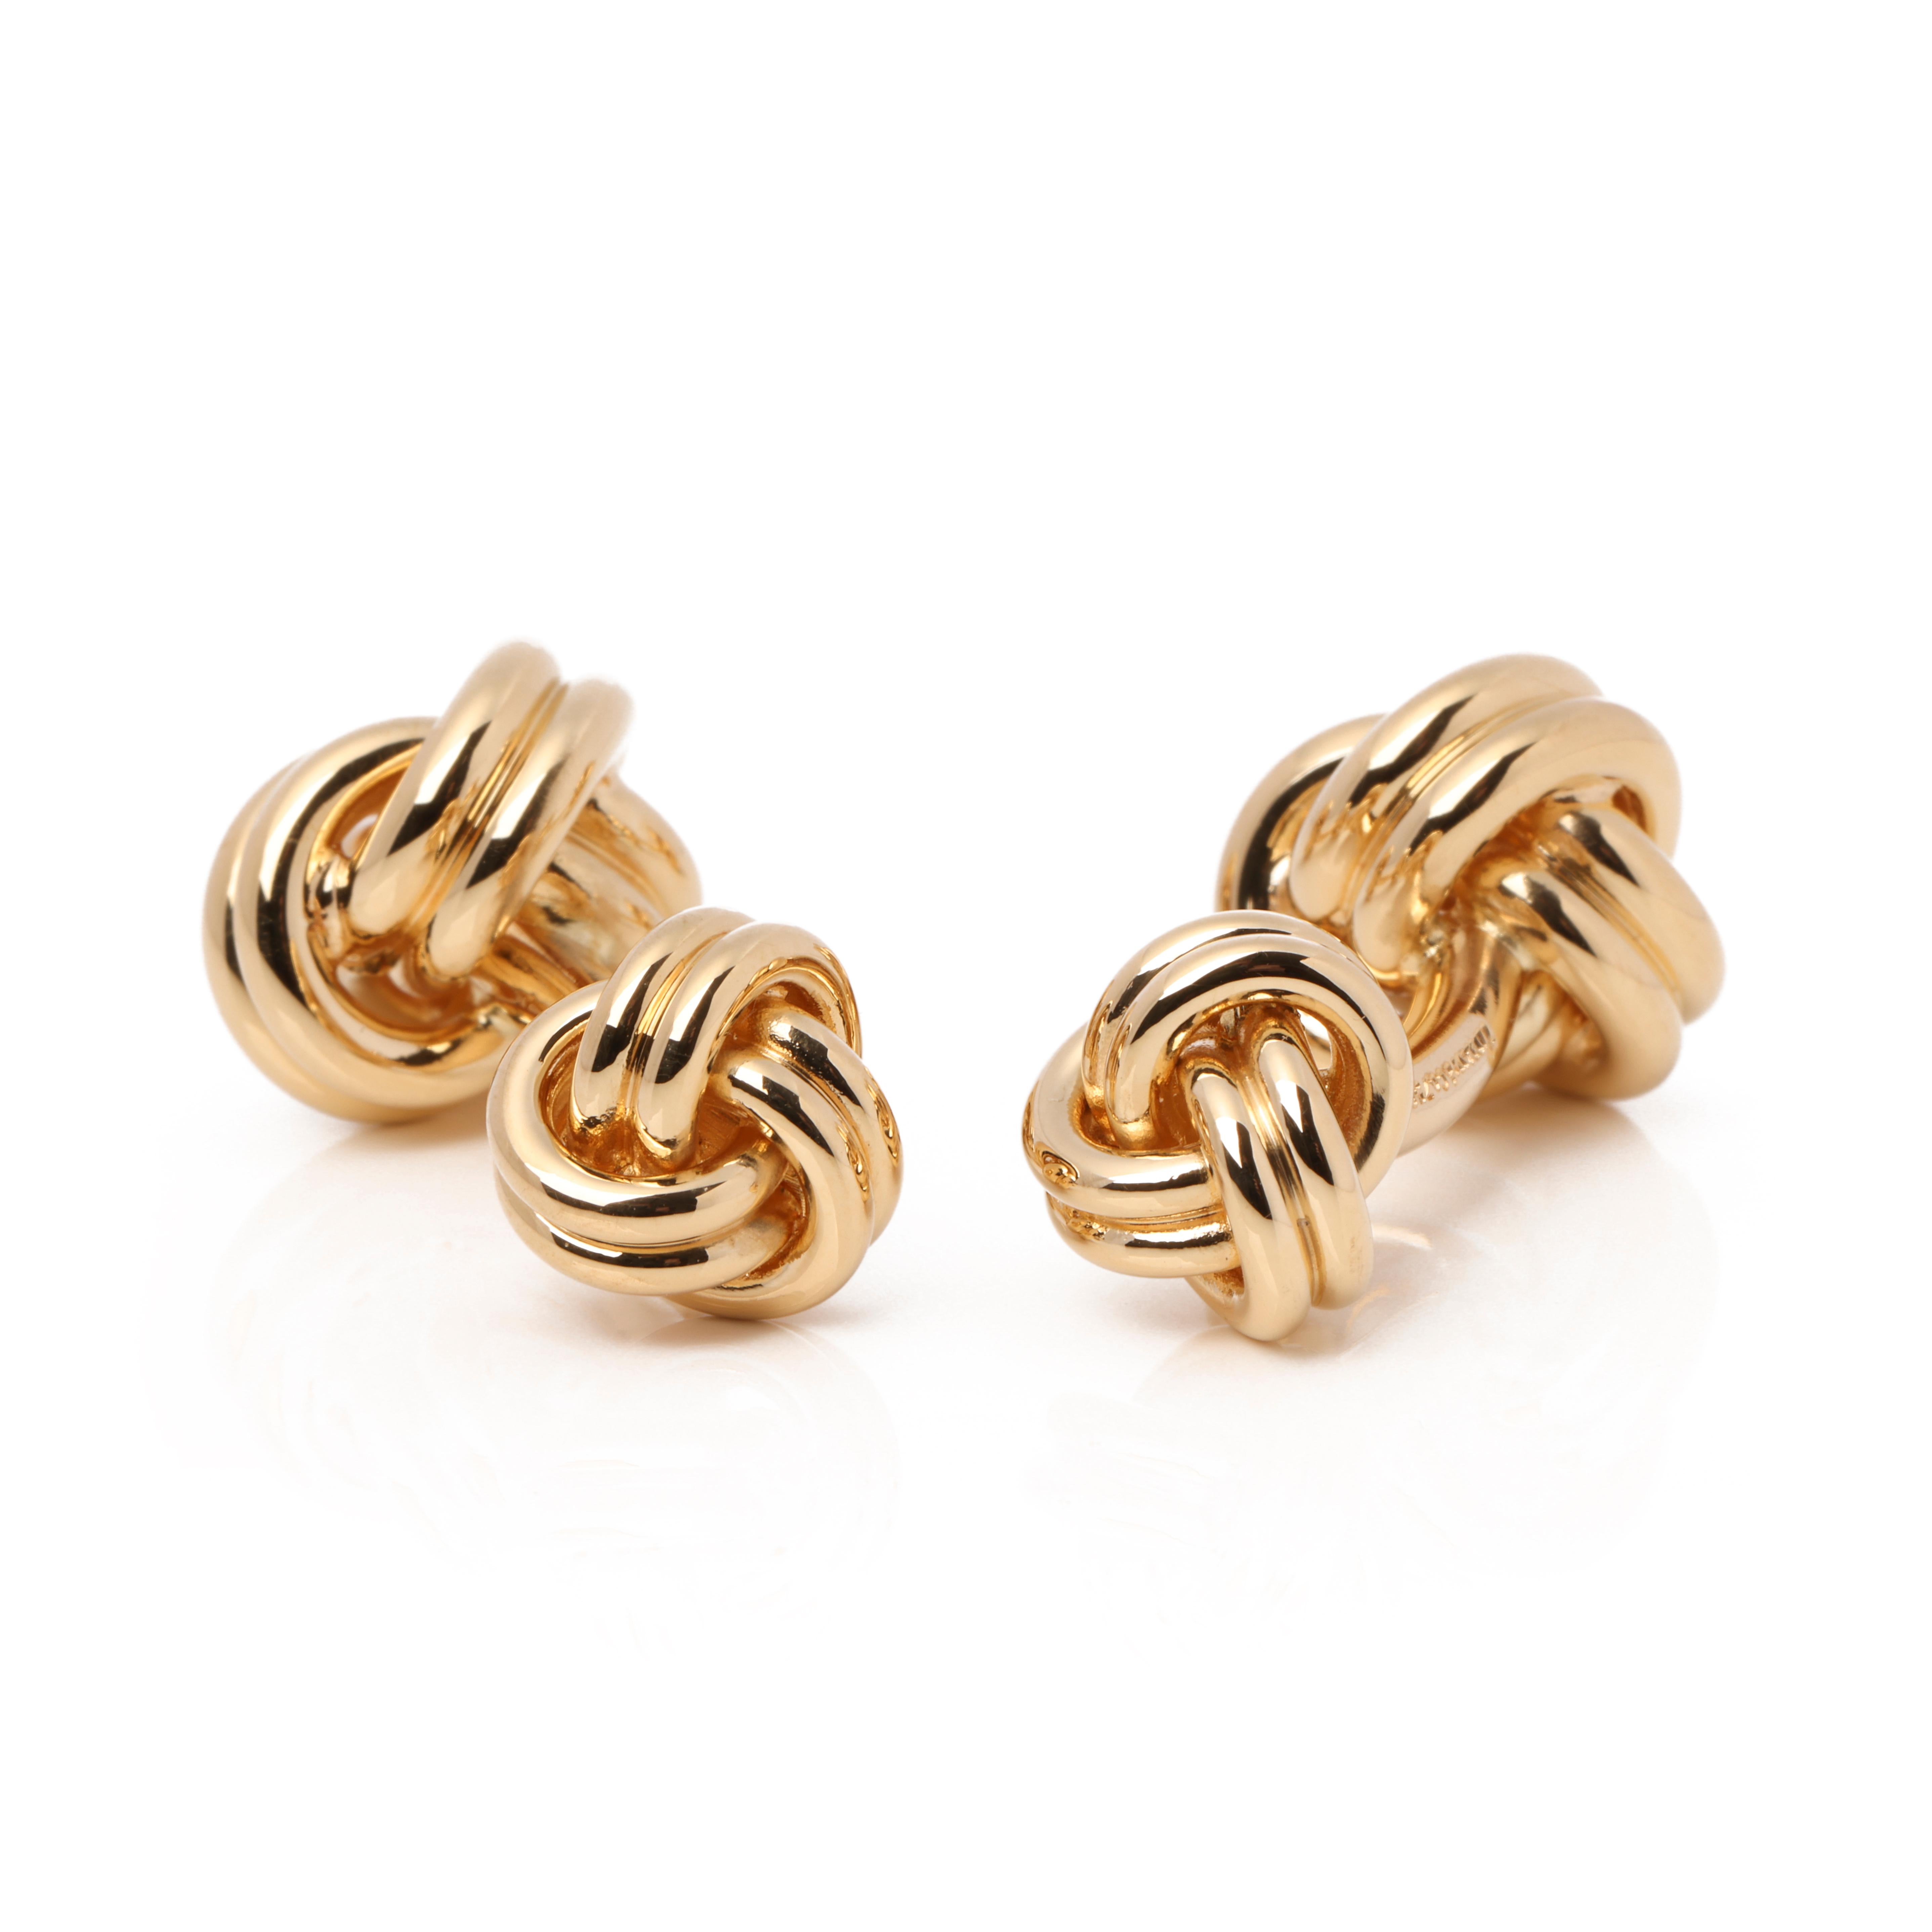 These cufflinks by Tiffany & Co are crafted in 18ct gold and in a knot design. Complete with Xupes presentation box. Our Xupes reference is J728 should you need to quote this. 